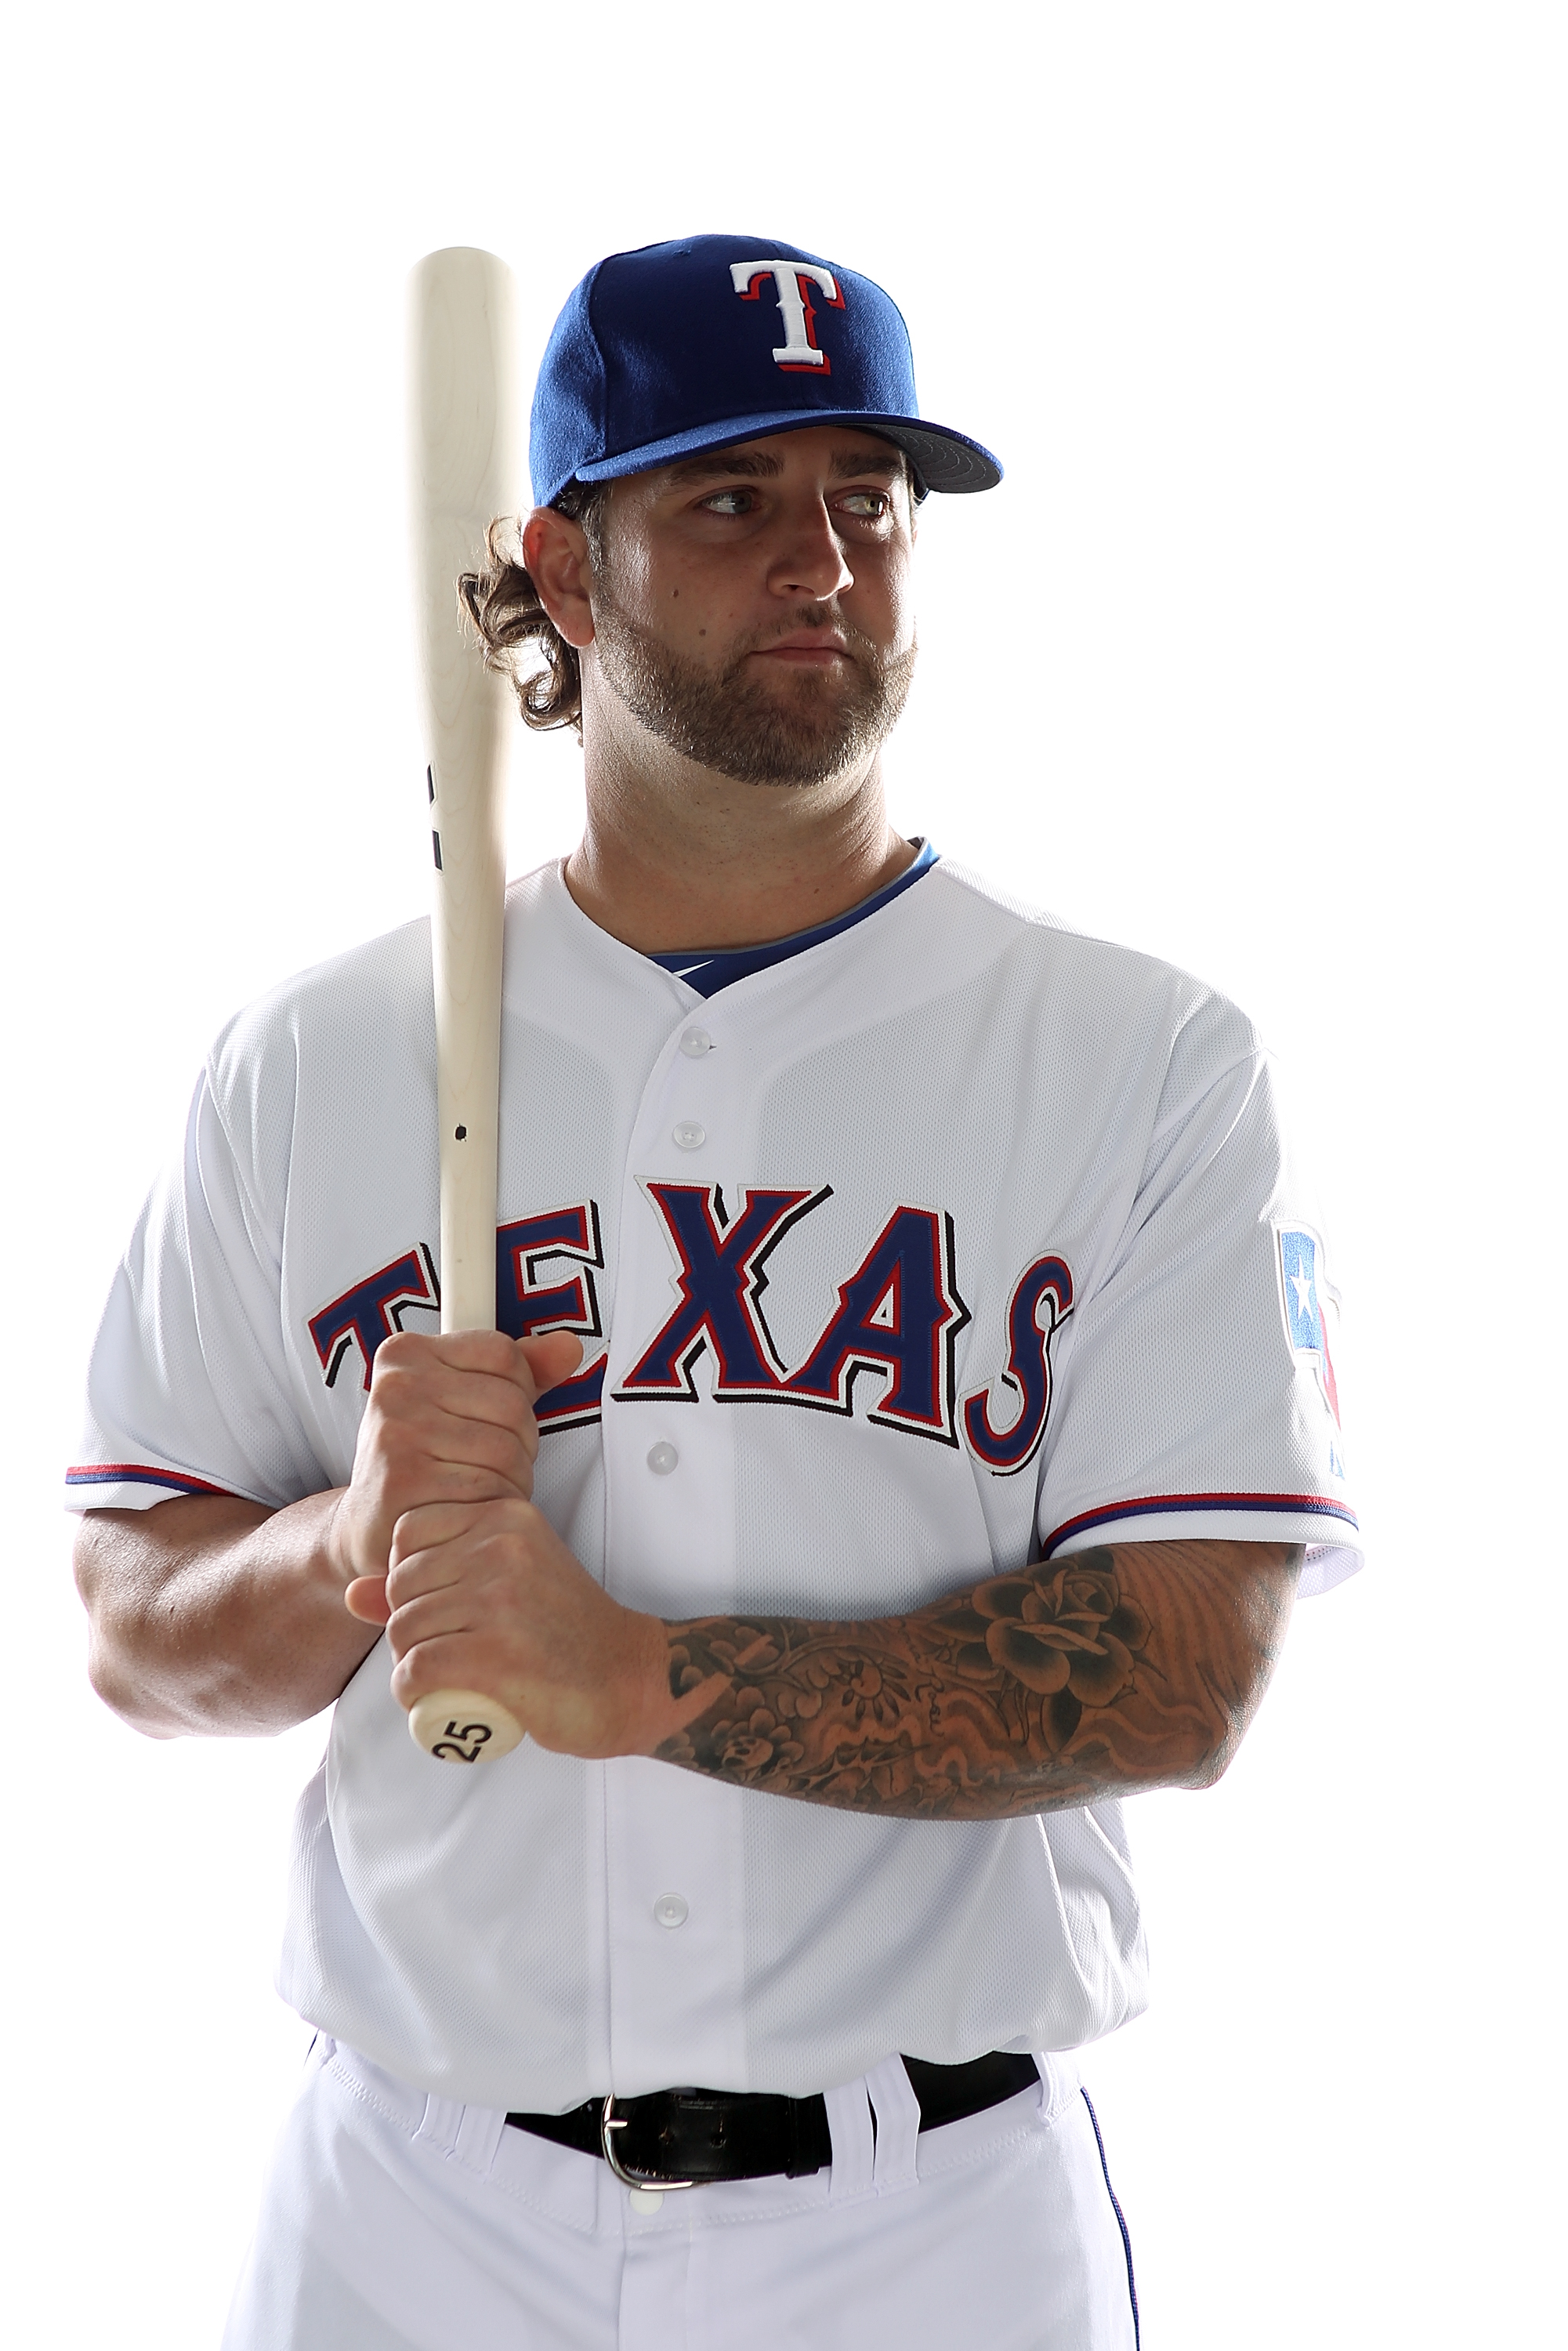 SURPRISE, AZ - FEBRUARY 25:  Mike Napoli #25 of the Texas Rangers poses for a portrait during Spring Training Media Day on February 25, 2011 at Surprise Stadium in Surprise, Arizona.  (Photo by Jonathan Ferrey/Getty Images)